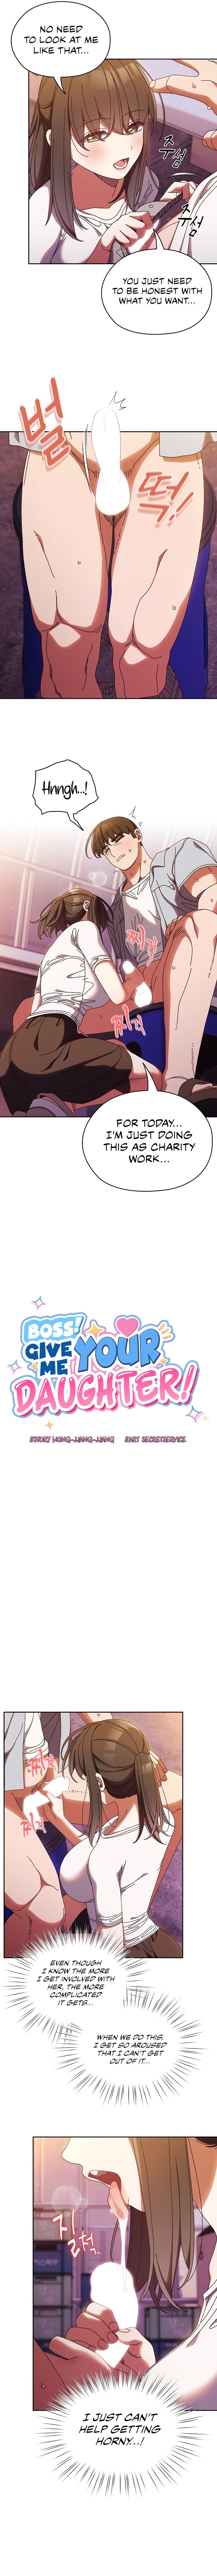 boss-give-me-your-daughter-chap-32-3